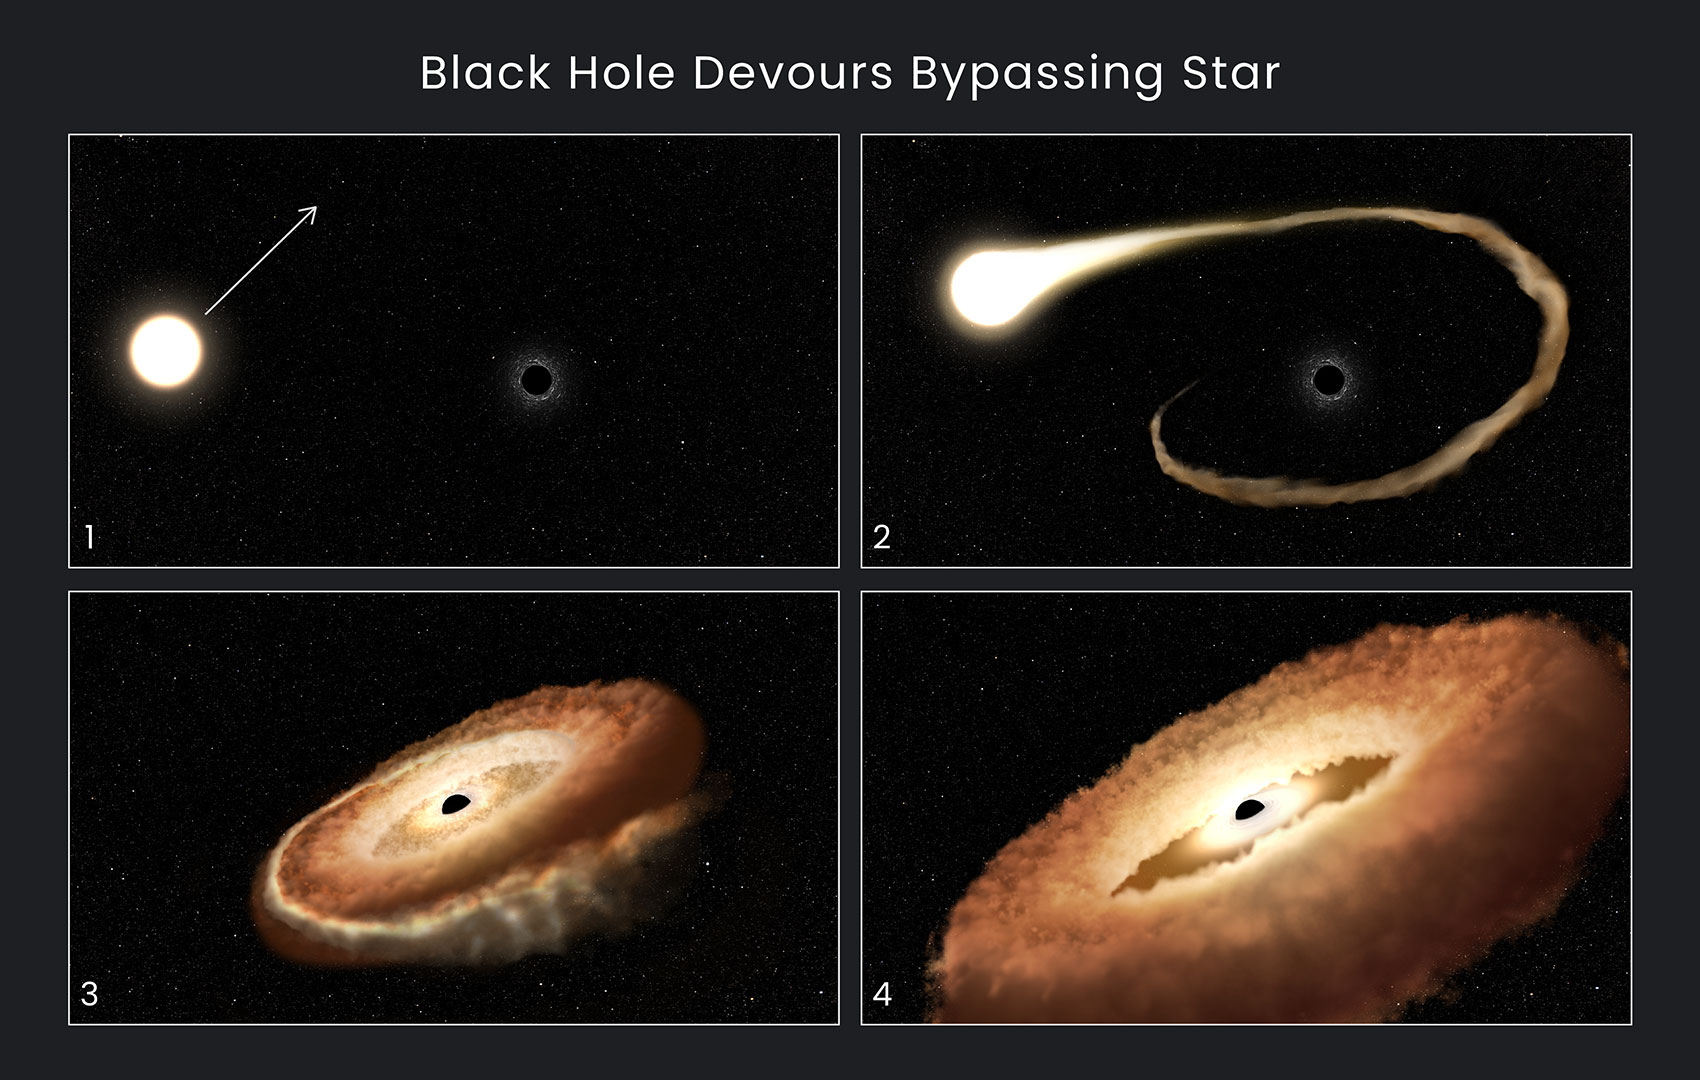 This sequence of artist's illustrations shows how a black hole can devour a bypassing star. 1) A normal star passes near a supermassive black hole in the center of a galaxy. 2) The star's outer gasses are pulled into the black hole's gravitational field. 3) The star is shredded as tidal forces pull it apart. 4) The stellar remnants are pulled into a donut-shaped ring around the black hole, and will eventually fall into the black hole, unleashing a tremendous amount of light and high-energy radiation.